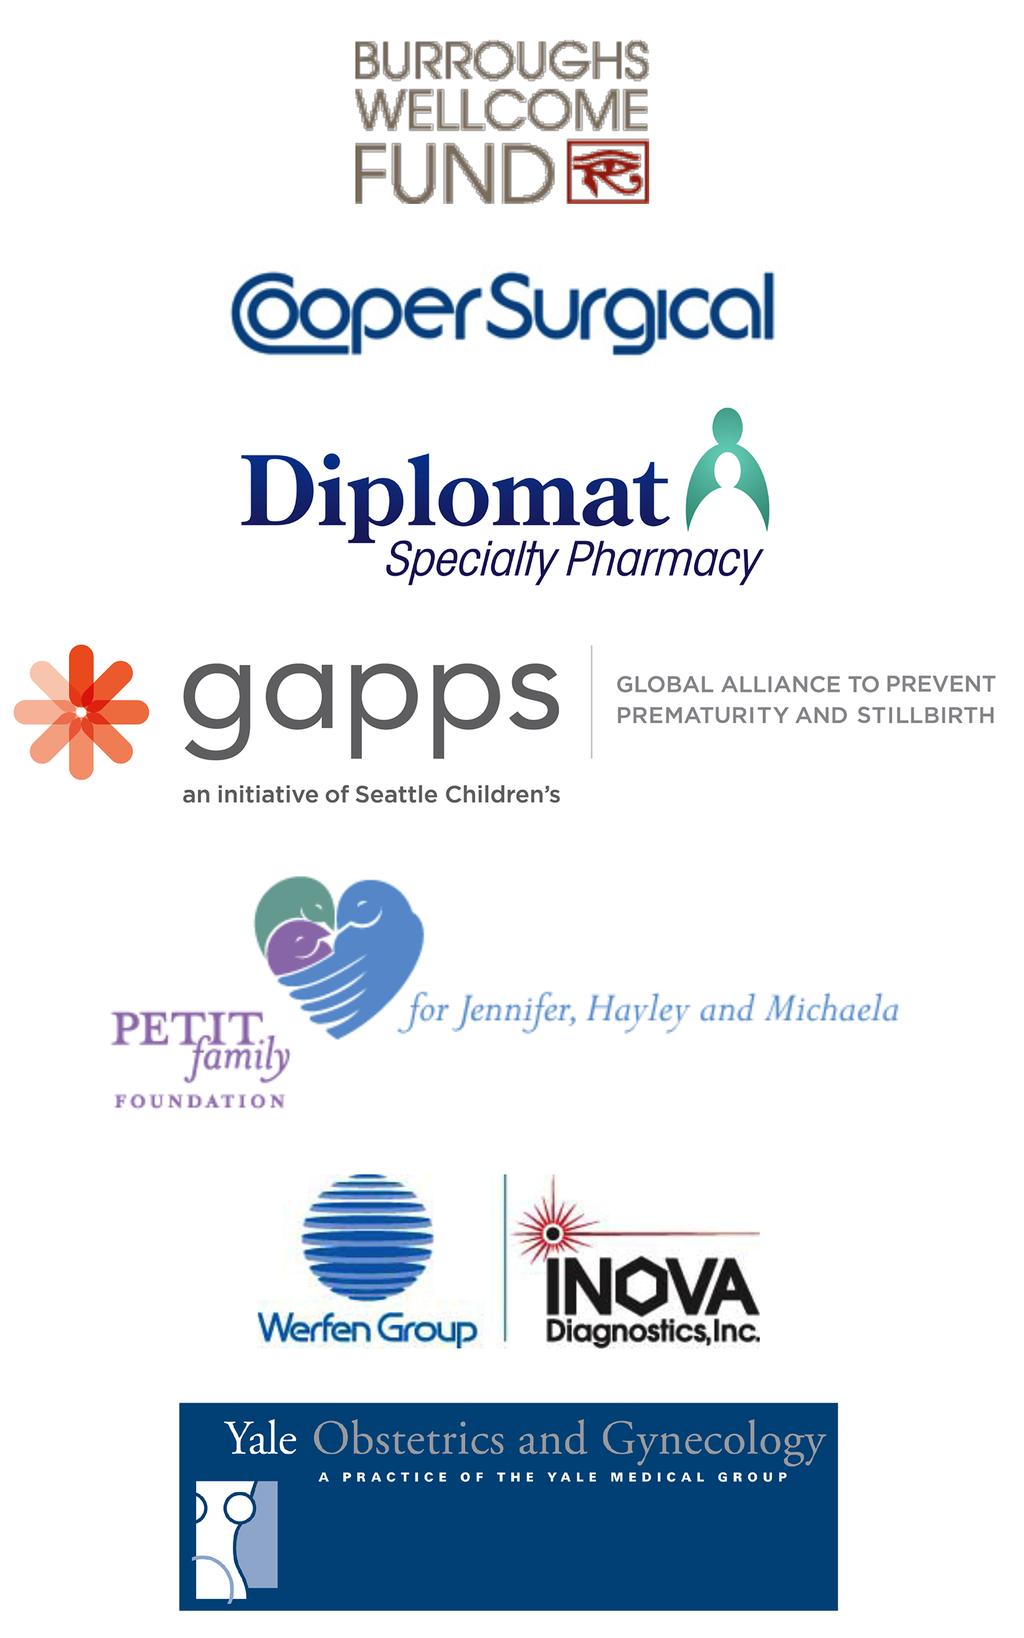 Meeting Sponsors The ASRI would like to acknowledge and thank the following sponsors for